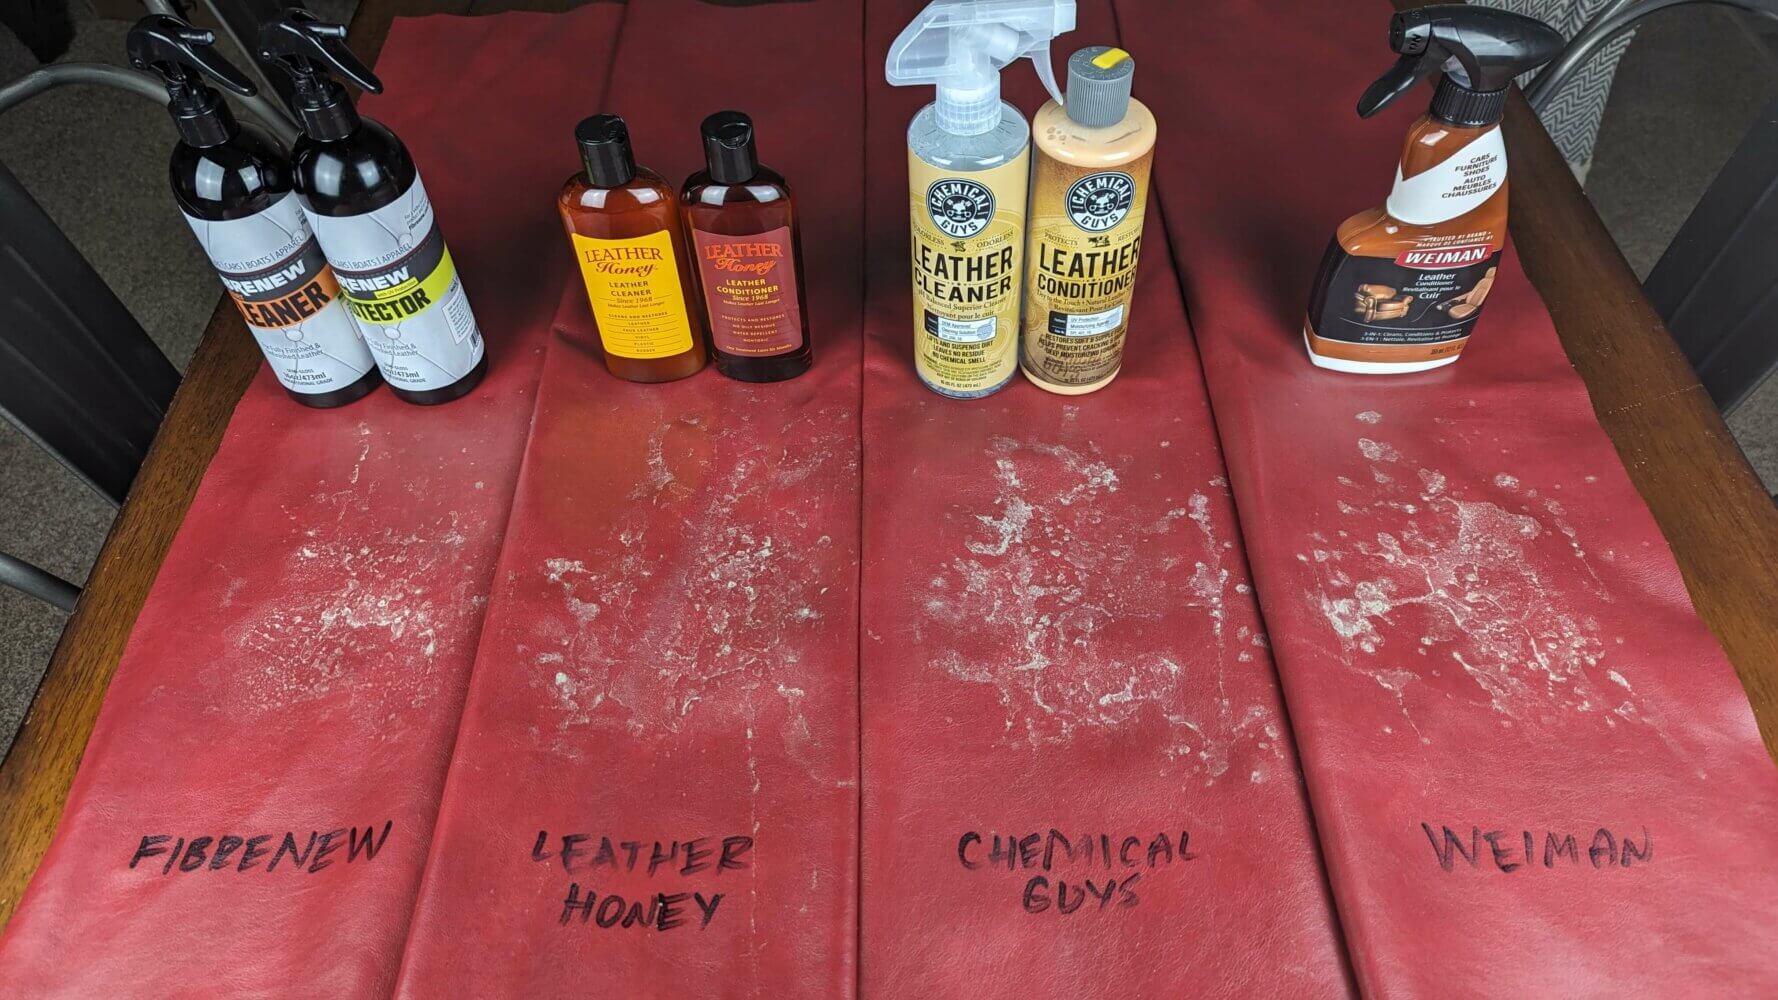 the leather cleaner brands and the leather scrap